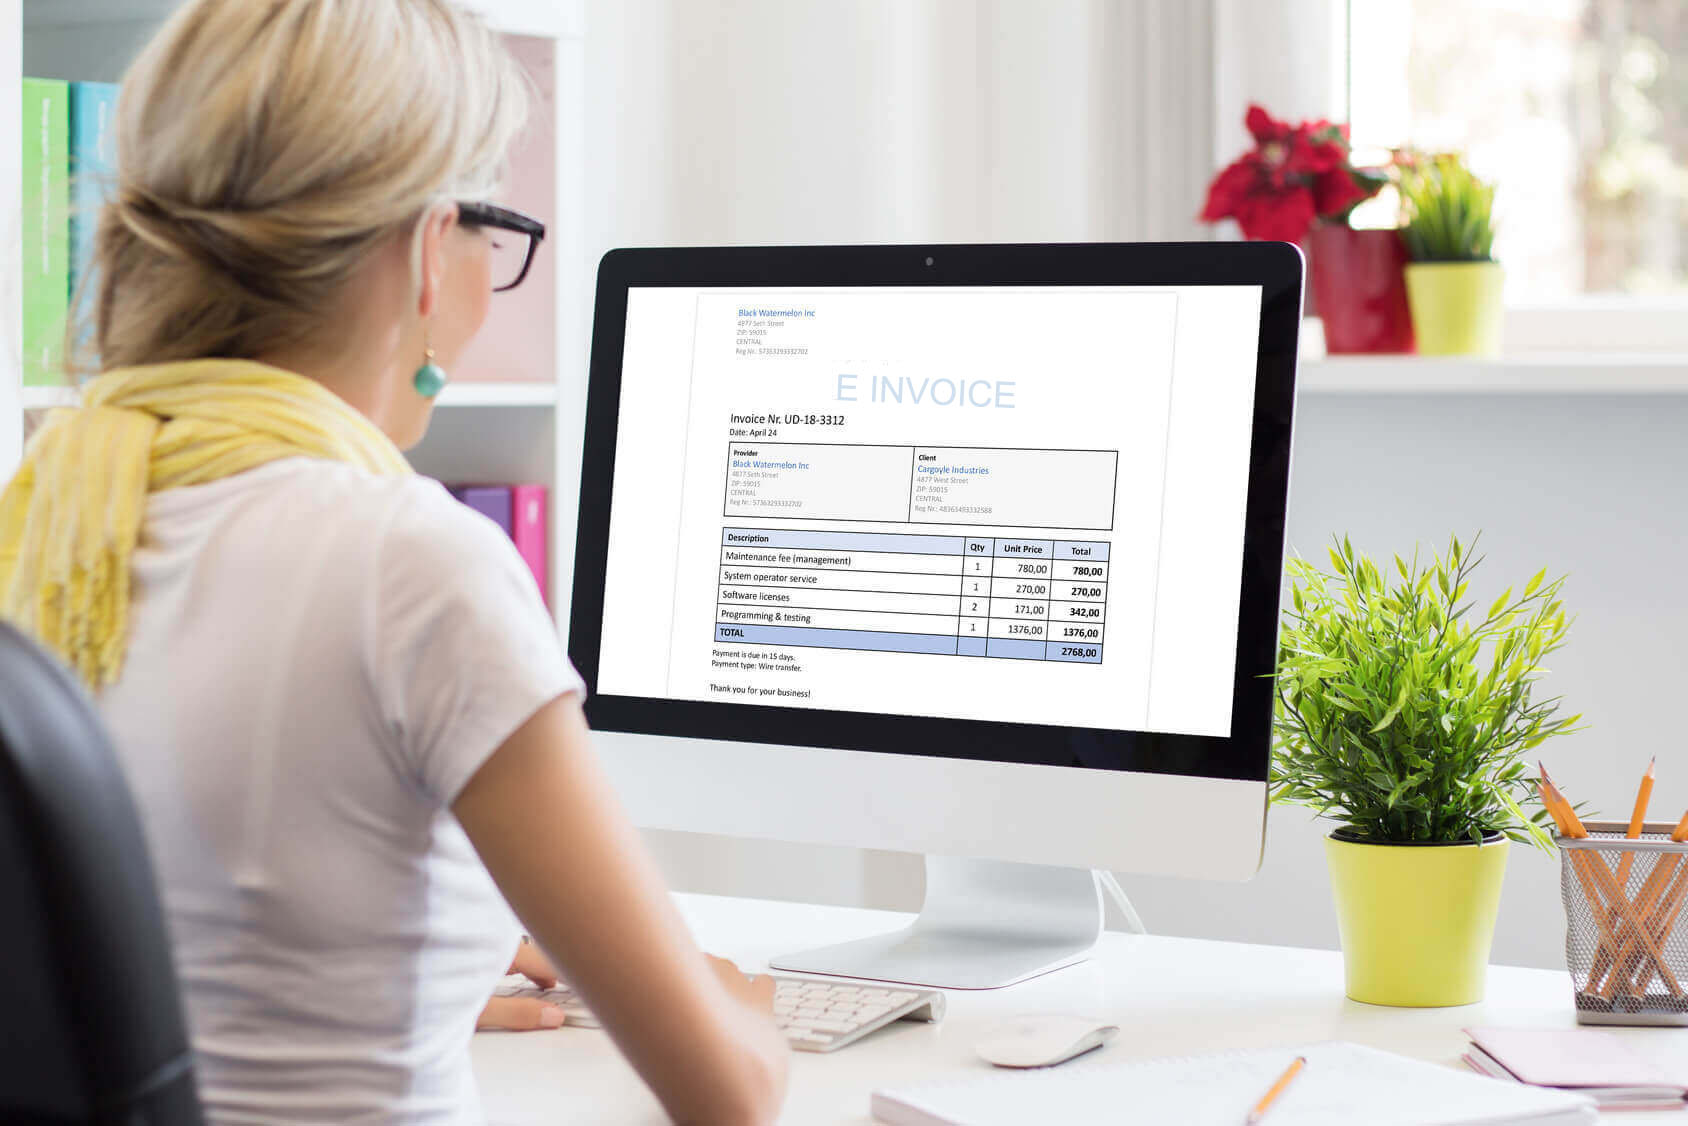 E-invoicing software for small businesses